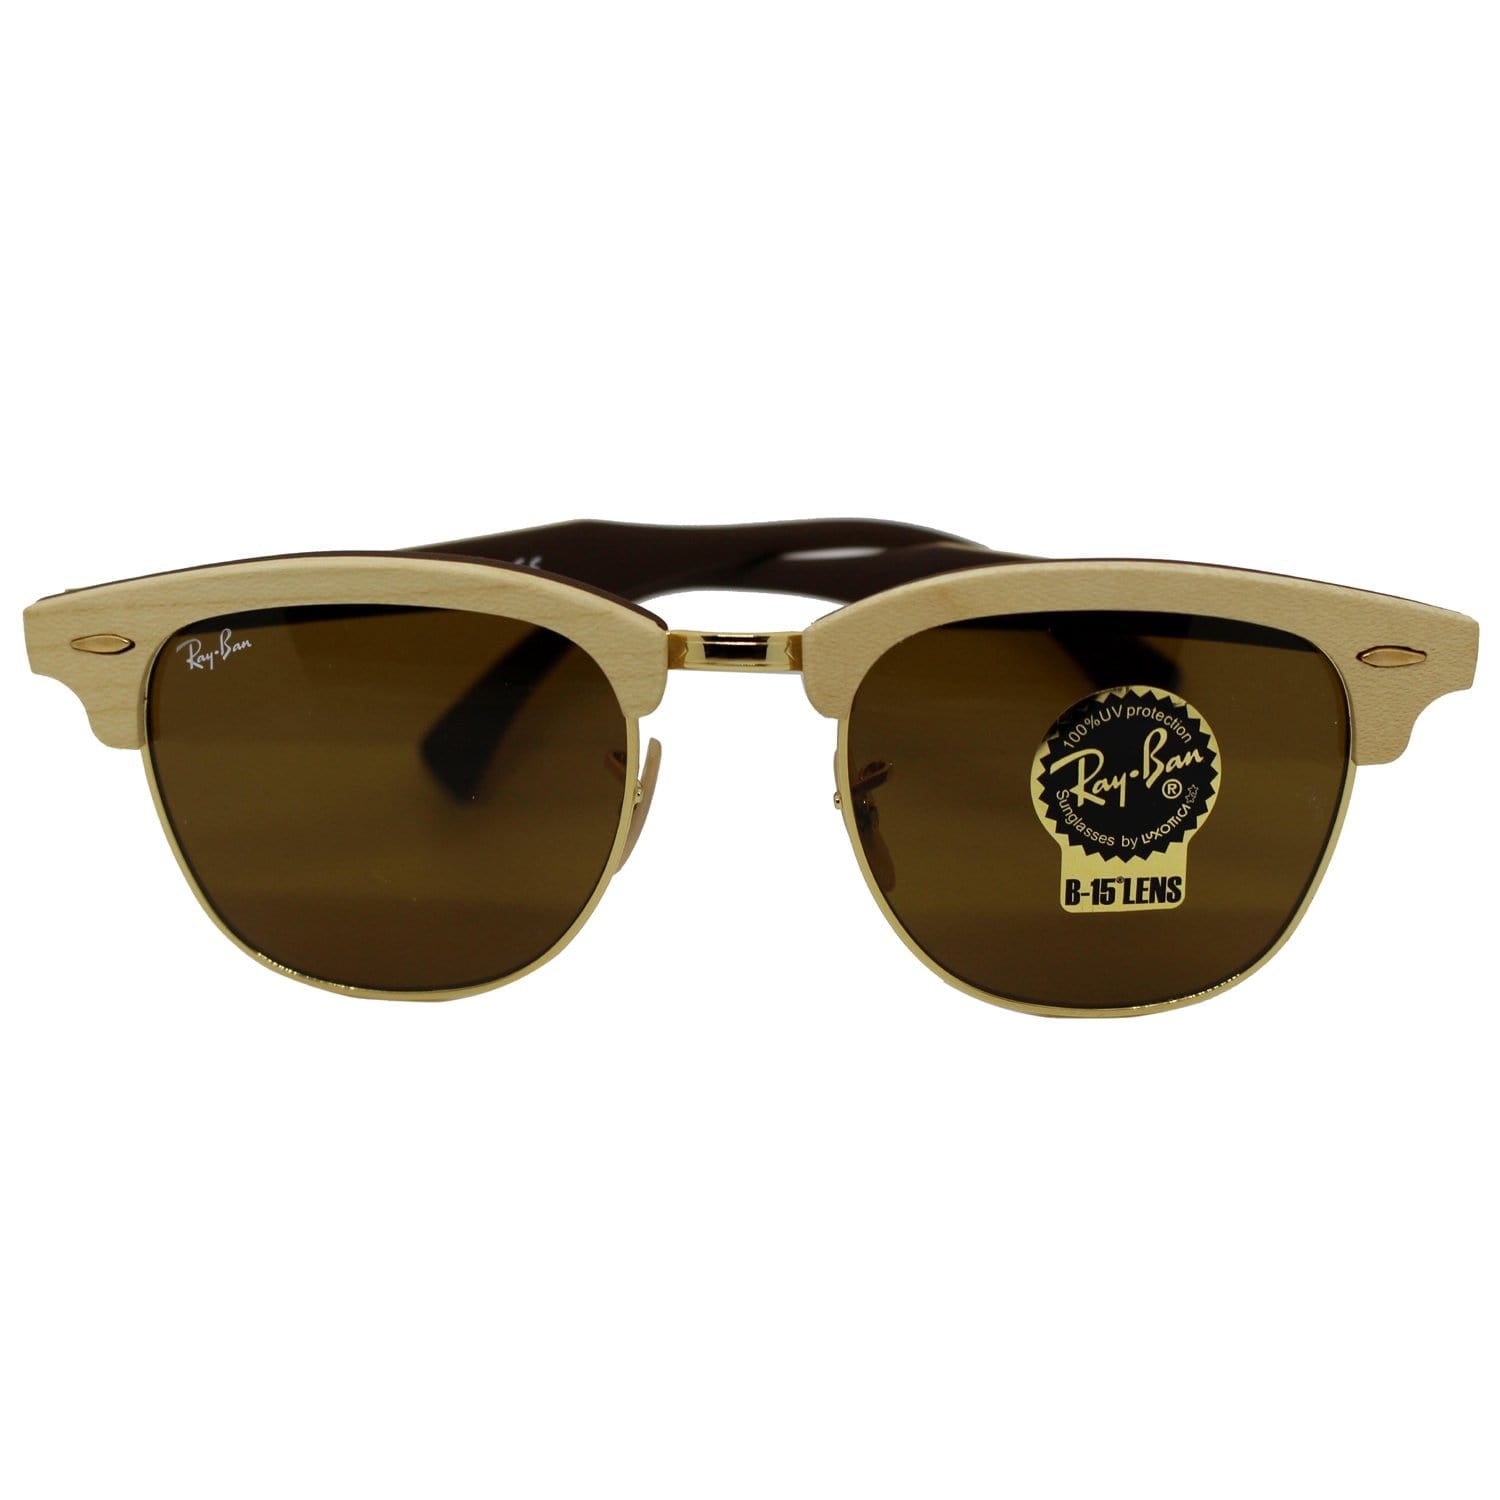 Ray-Ban RB3016M 1179 Clubmaster Wood Sunglasses Brown Classic B-15 Len